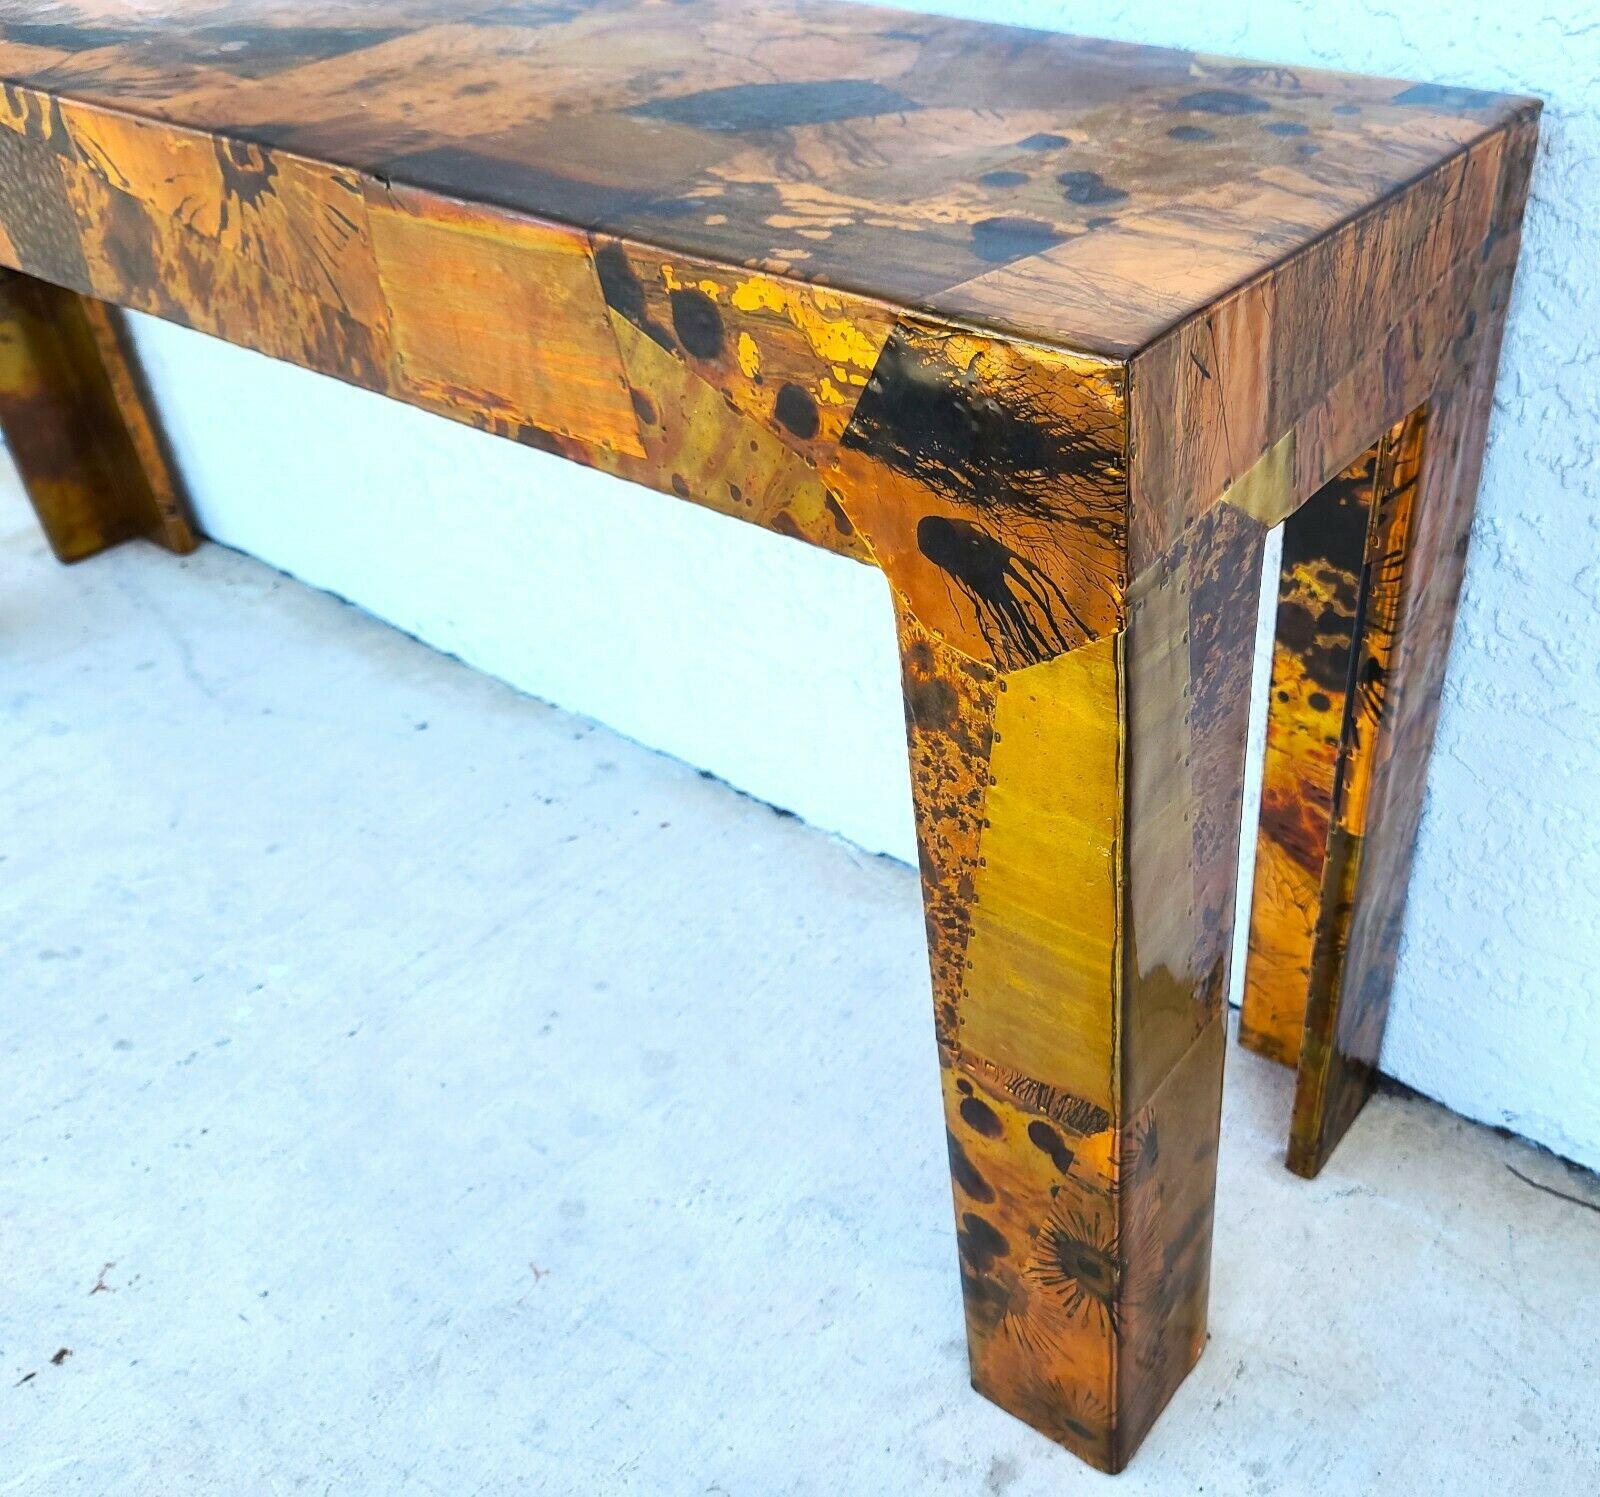 Offering One Of Our Recent Palm Beach Estate Fine Furniture Acquisitions Of A
1970s Brutalist Copper & Brass Patchwork Console Table in the Style of Paul Evans
The entire table is sealed in a thick clear Polyurethane coating.

Approximate